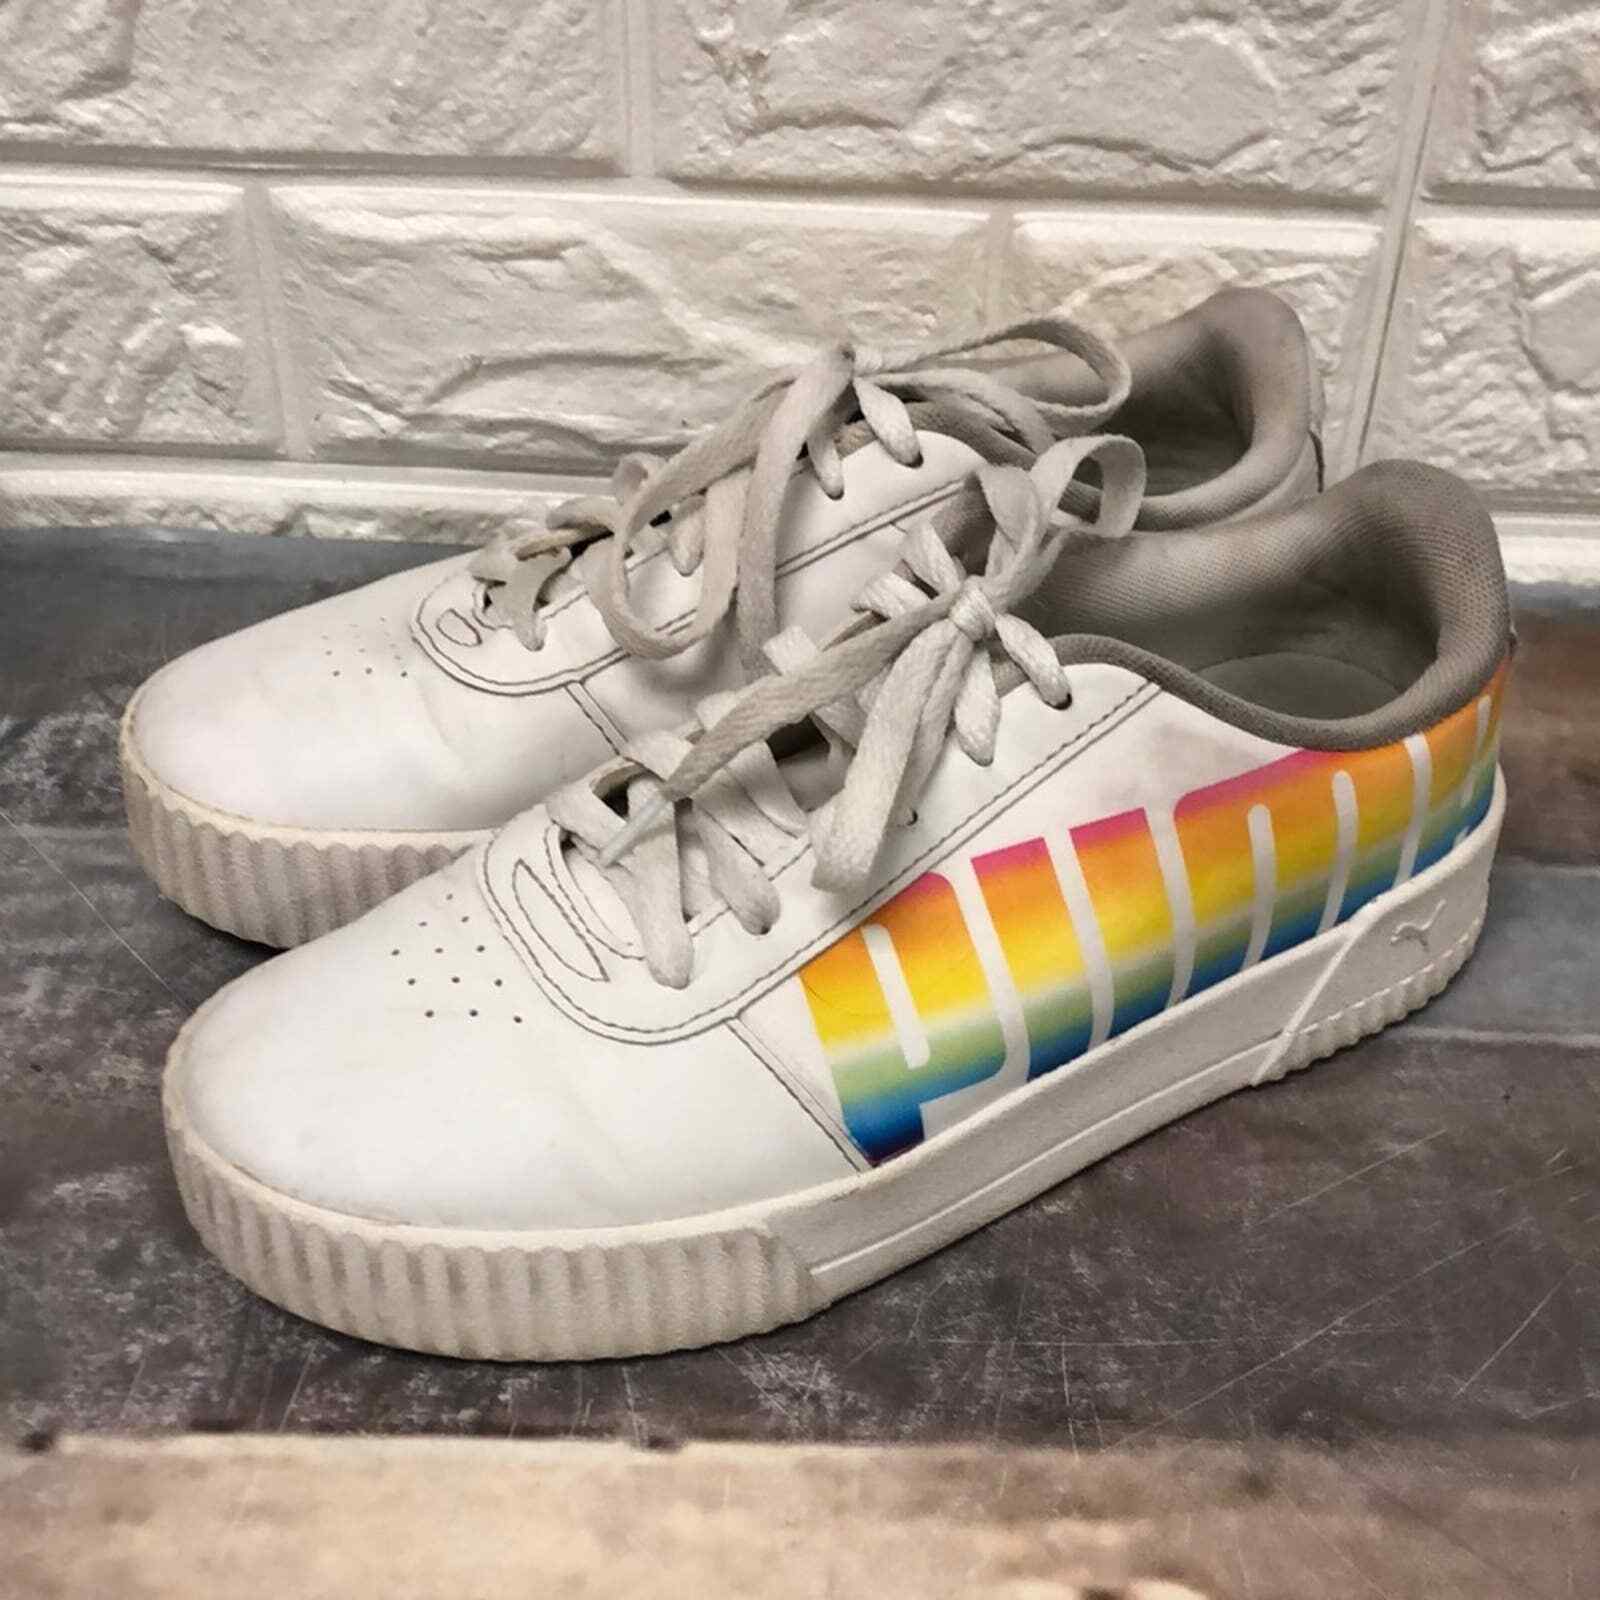 Primary image for Puma Carina Soft Foam Rainbow Letters Pride Sneakers Kids sz 6.5 White Low Top